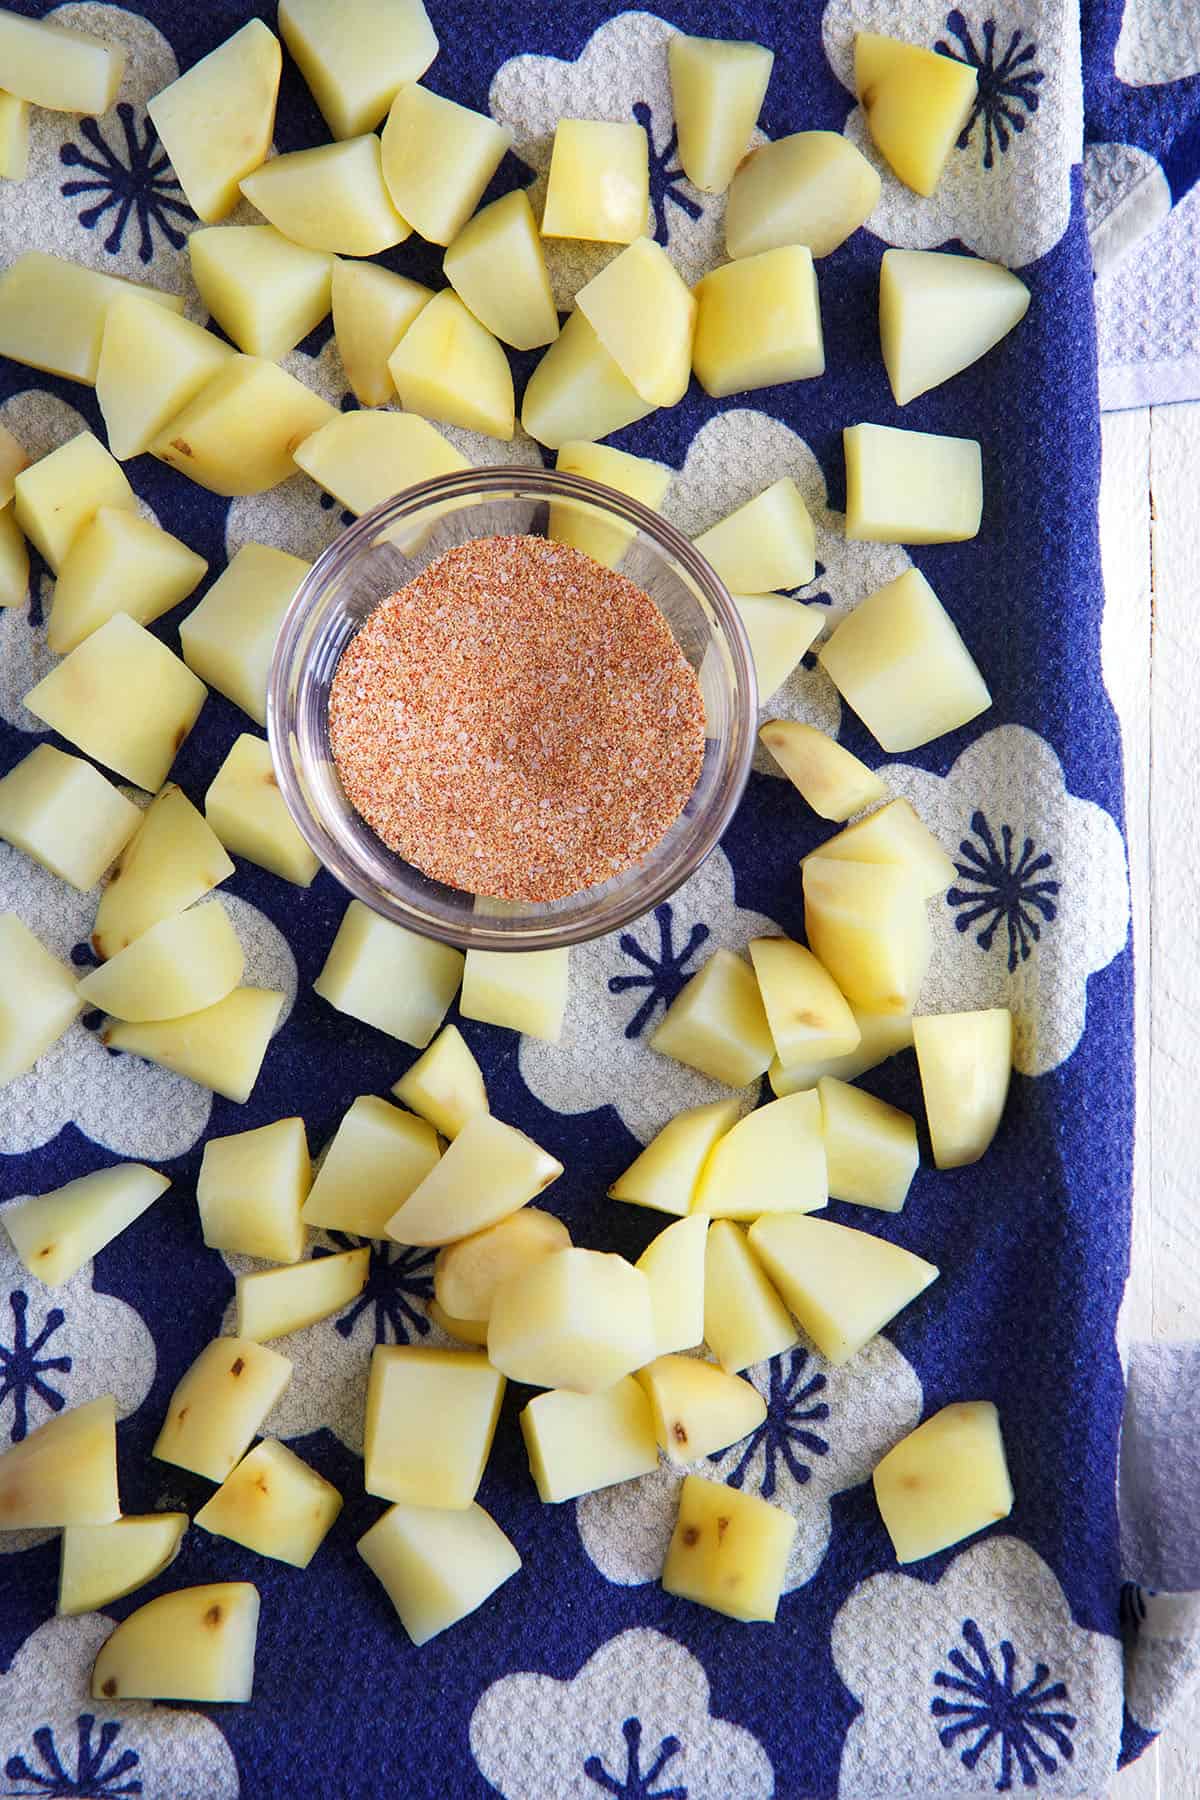 Cubed potatoes are placed next to a small bowl of seasoning. 